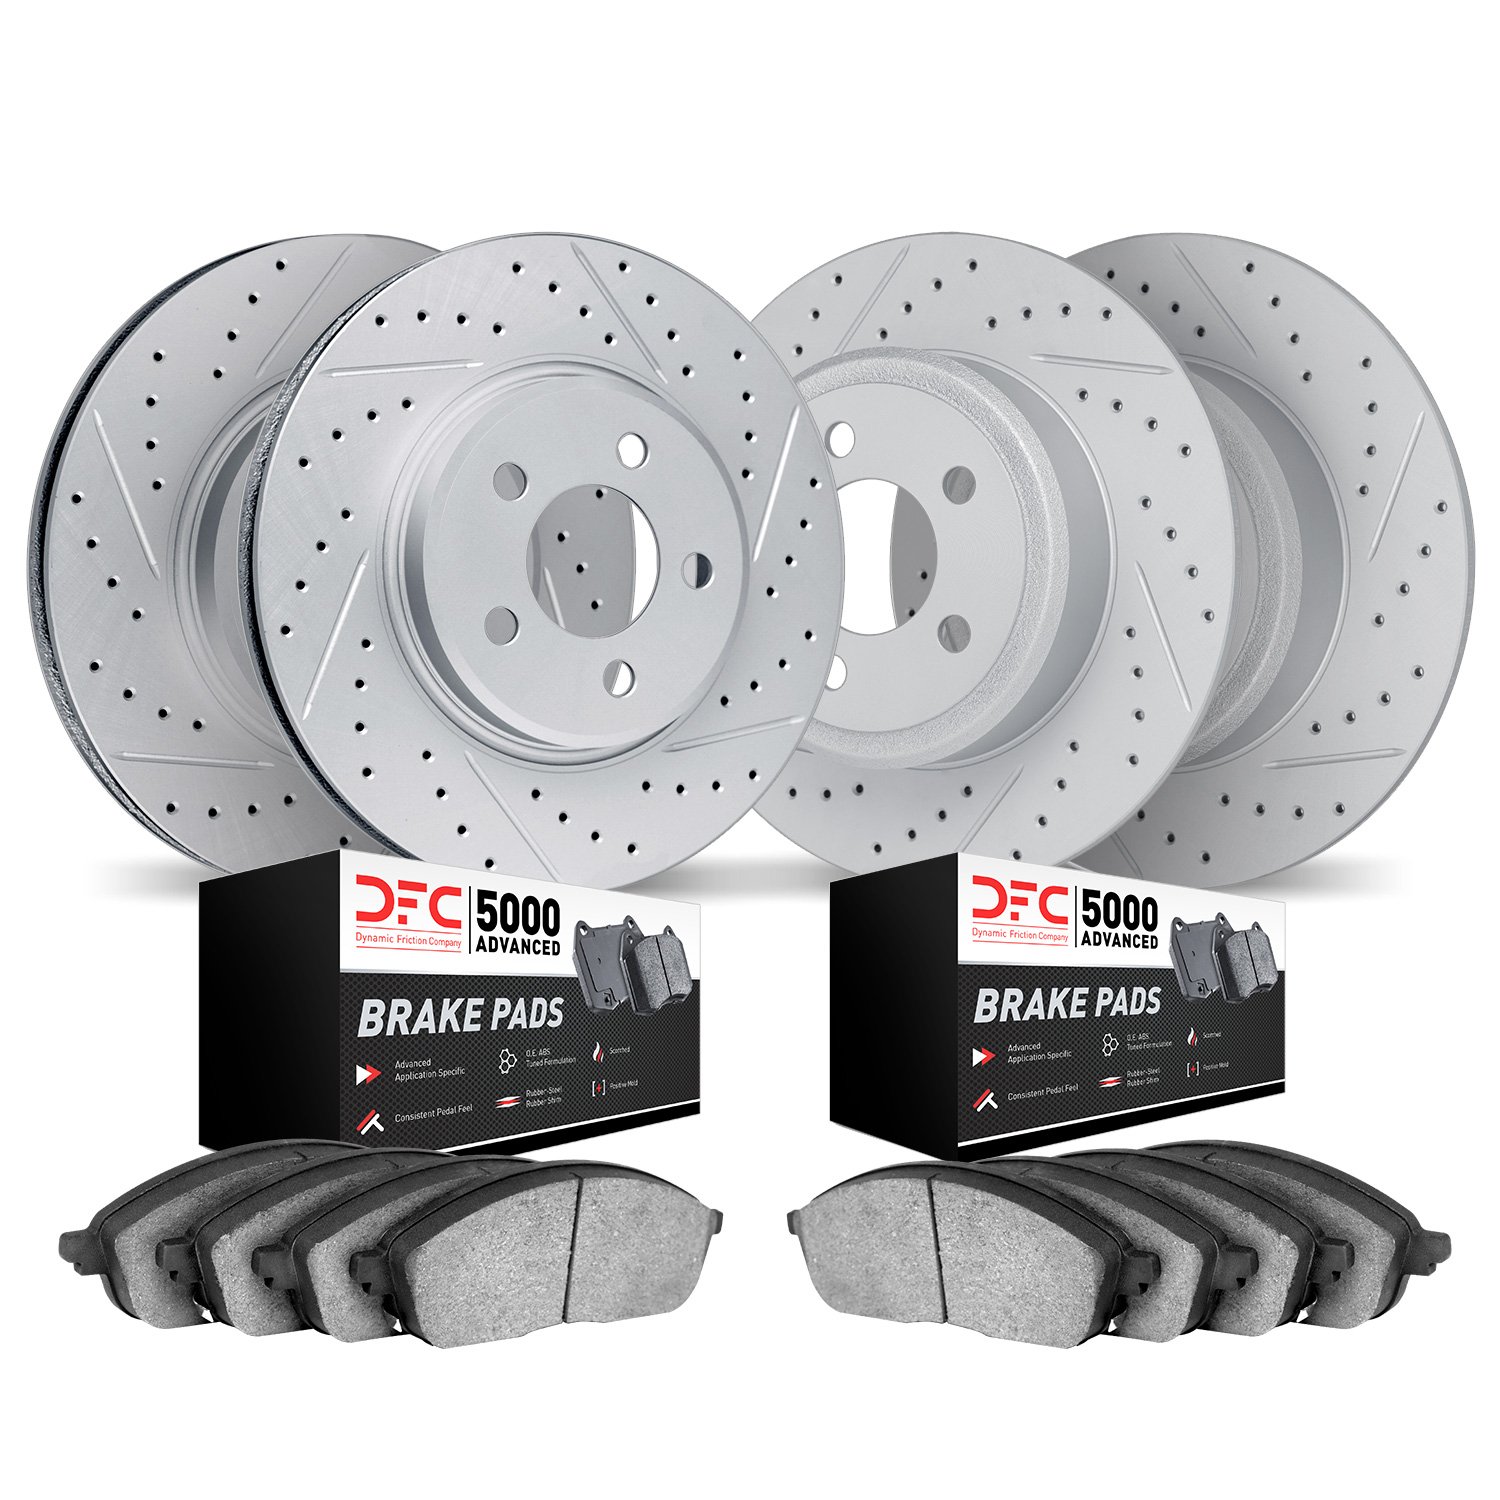 2504-72021 Geoperformance Drilled/Slotted Rotors w/5000 Advanced Brake Pads Kit, 2000-2005 Multiple Makes/Models, Position: Fron